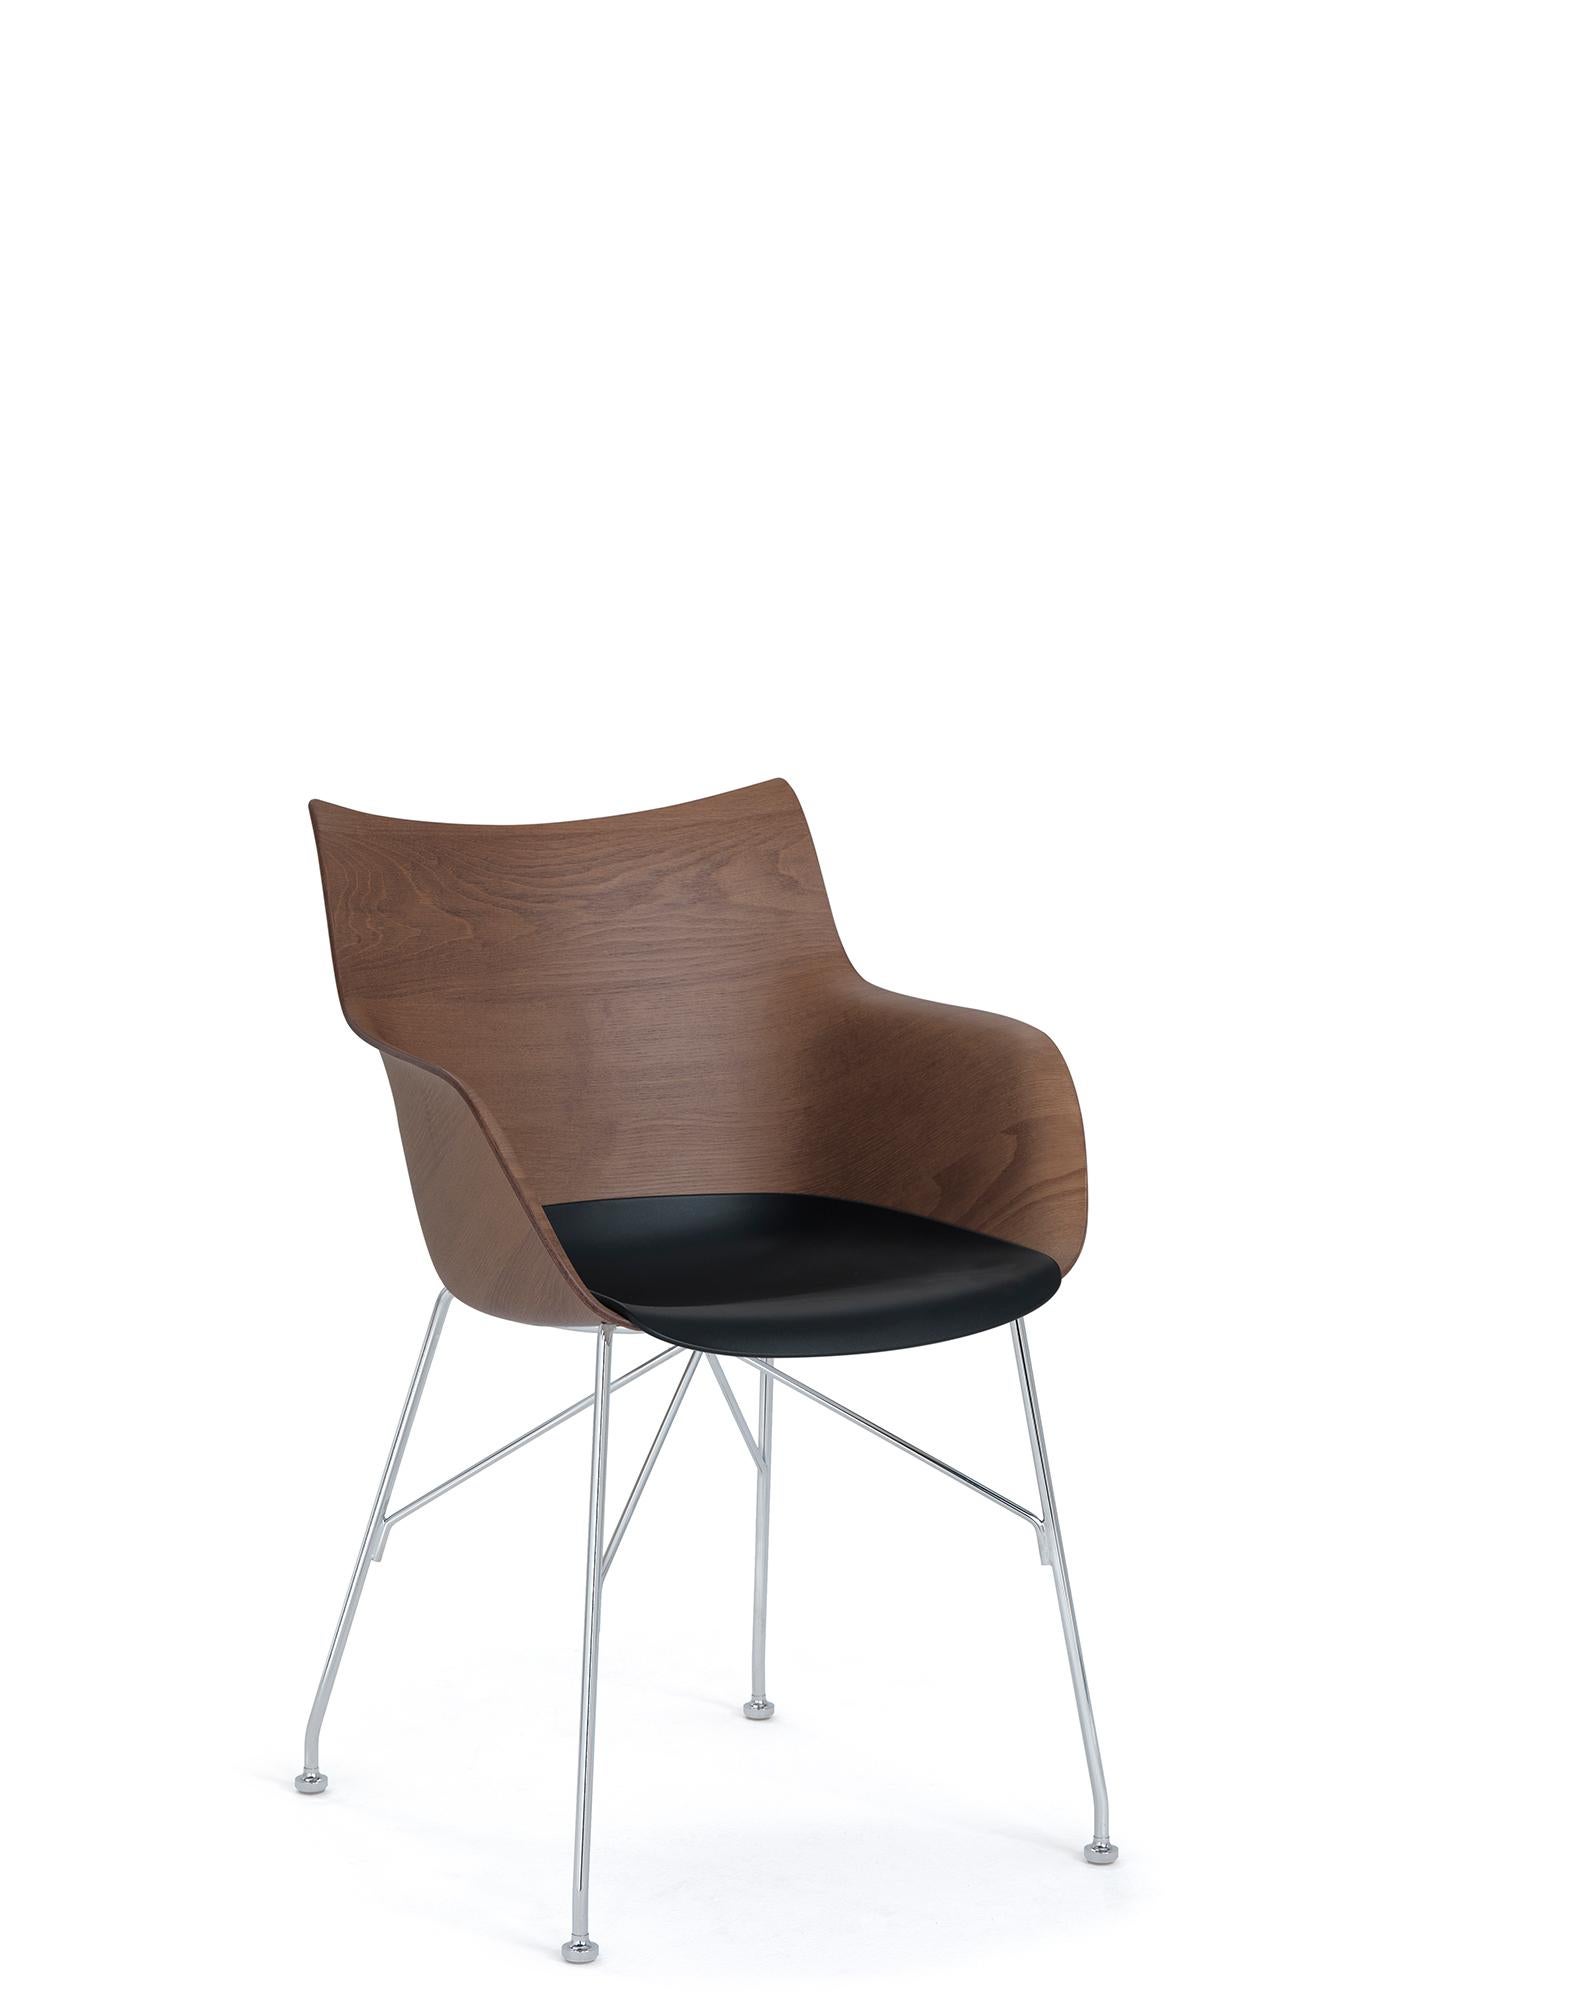 Q/Wood is the armchair from the Smart Wood collection, with enveloping lines that create soft armrests and offer maximum seating comfort. Using patented technology, the wood is worked with a mould designed to bring the curvature of the panel to the